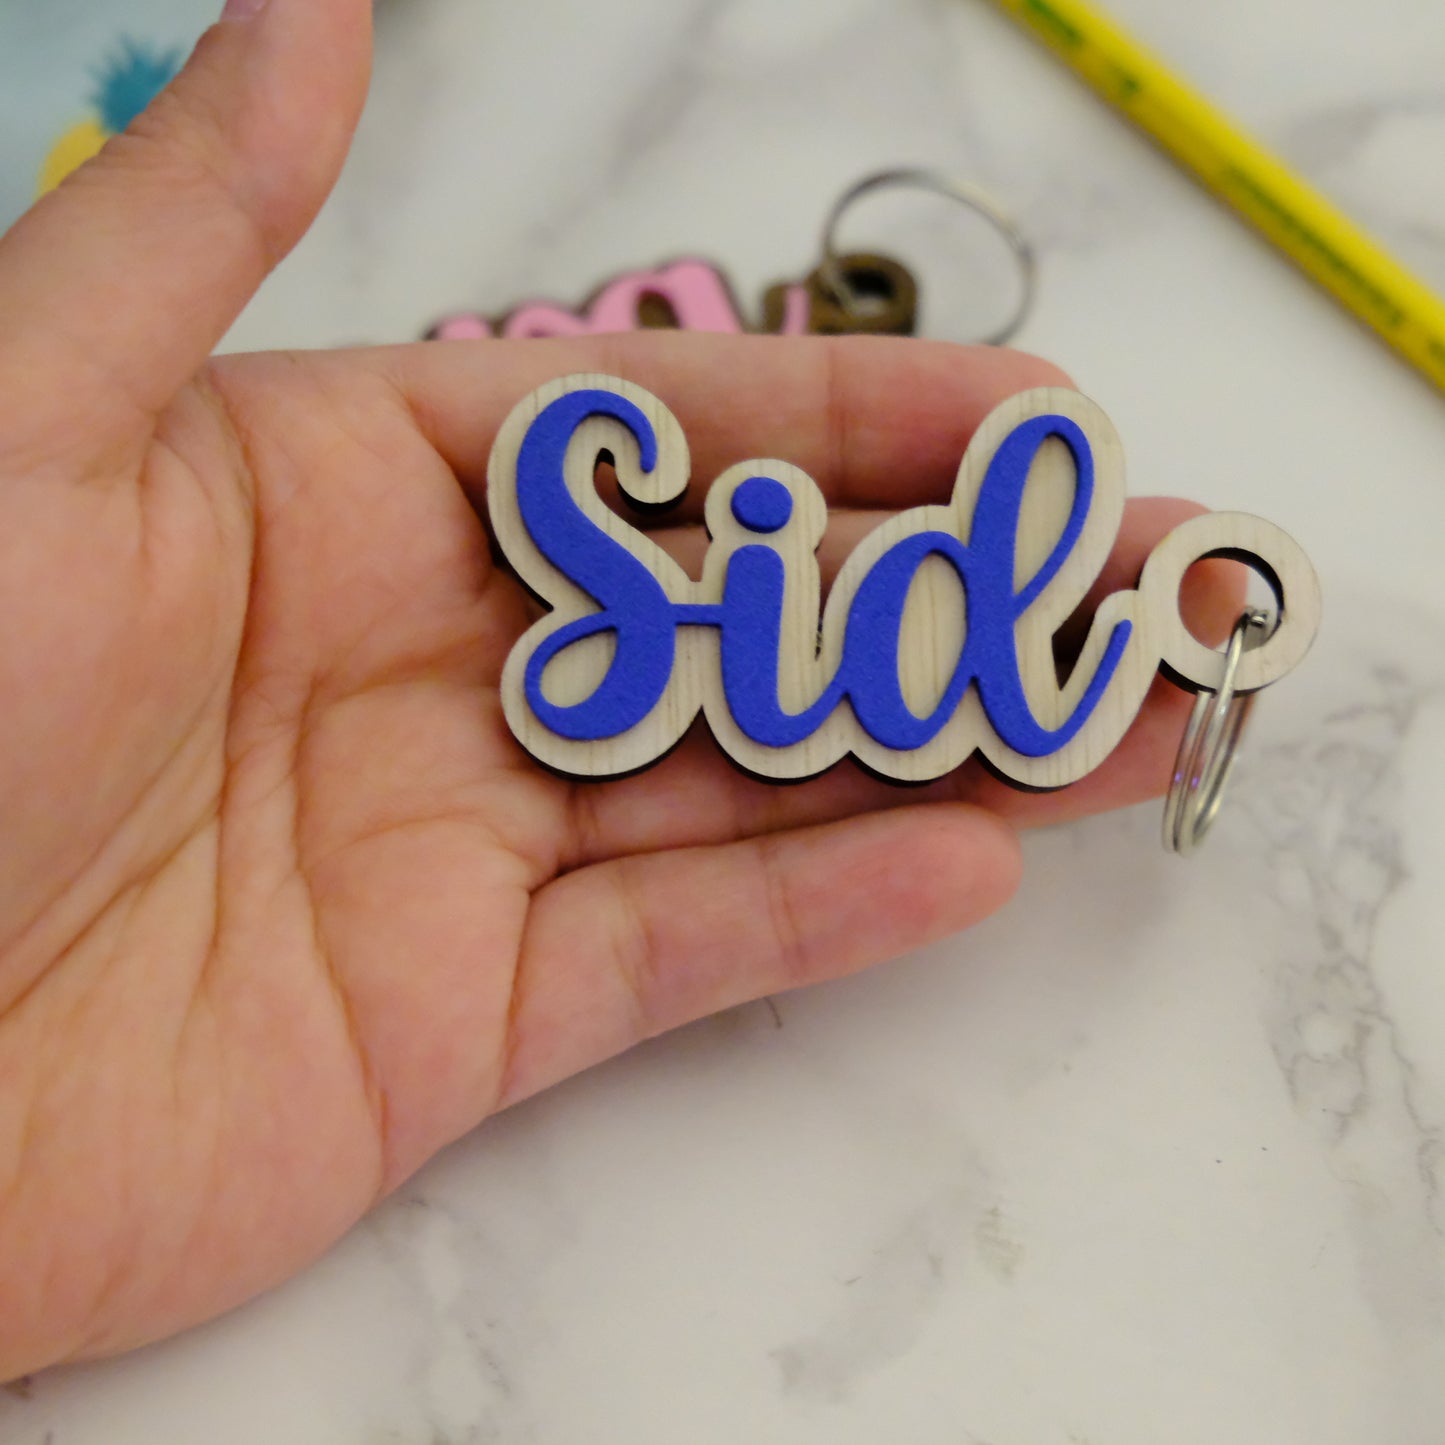 3D Name Keychains, Personalized favors